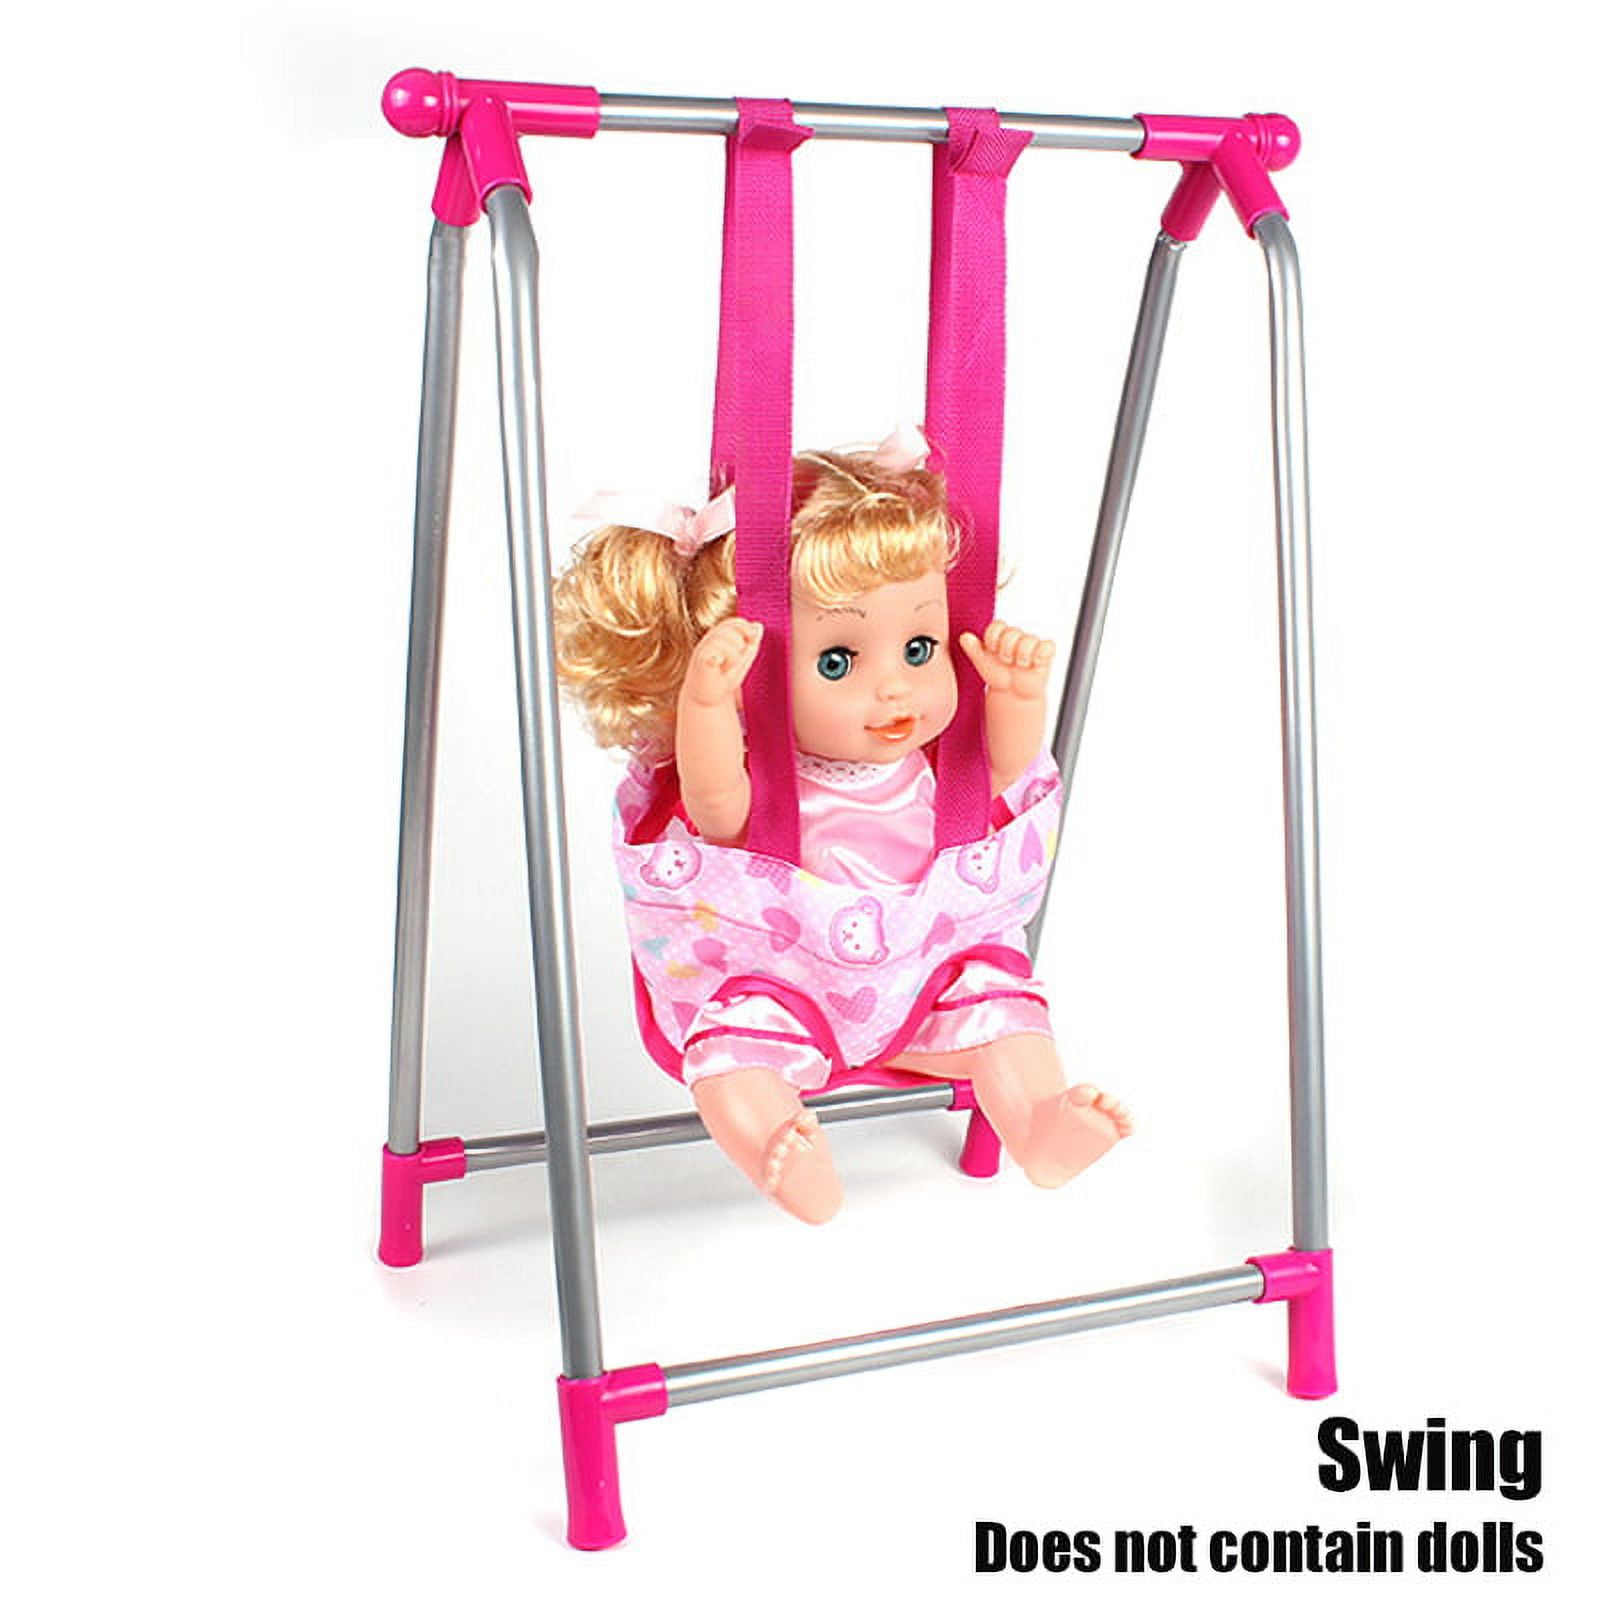 Fridja Cute Baby Doll Playsets With Movable Arms & Legs Simulation Sounds  Kids Toy 